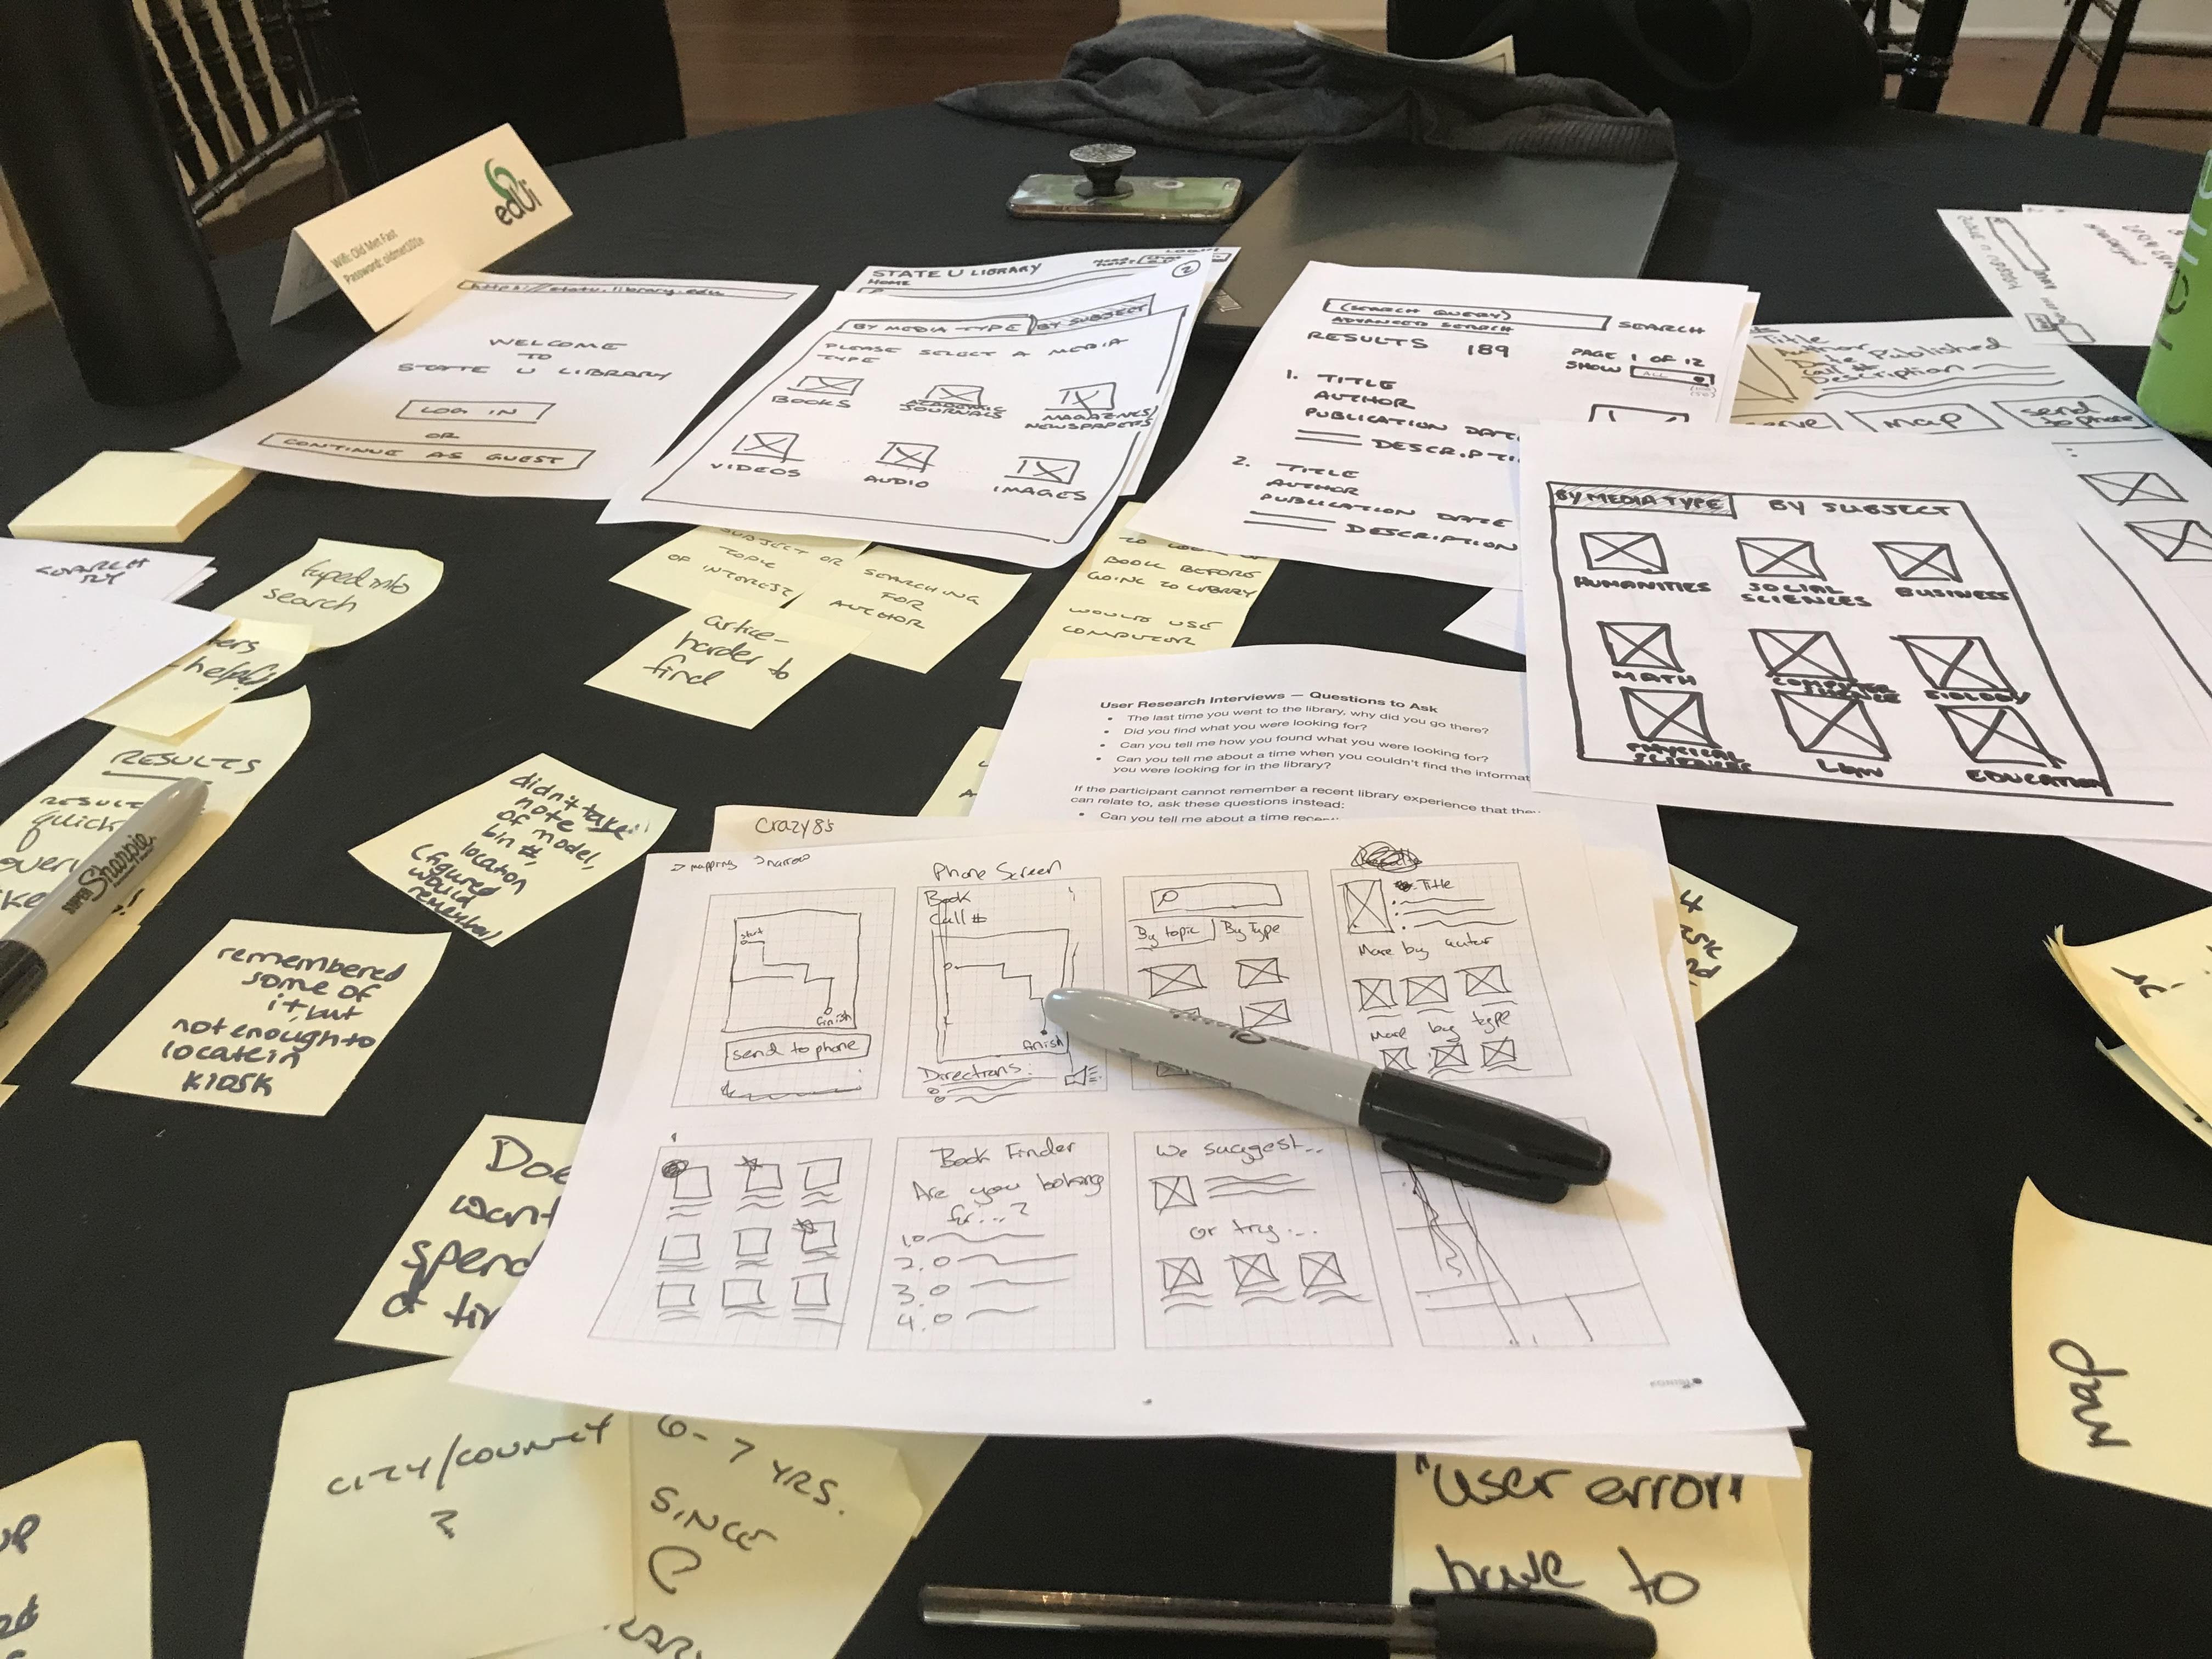 Sheets of paper and yellow sticky notes with web design sketches and wireframes drawn on them, arranged on a table. 